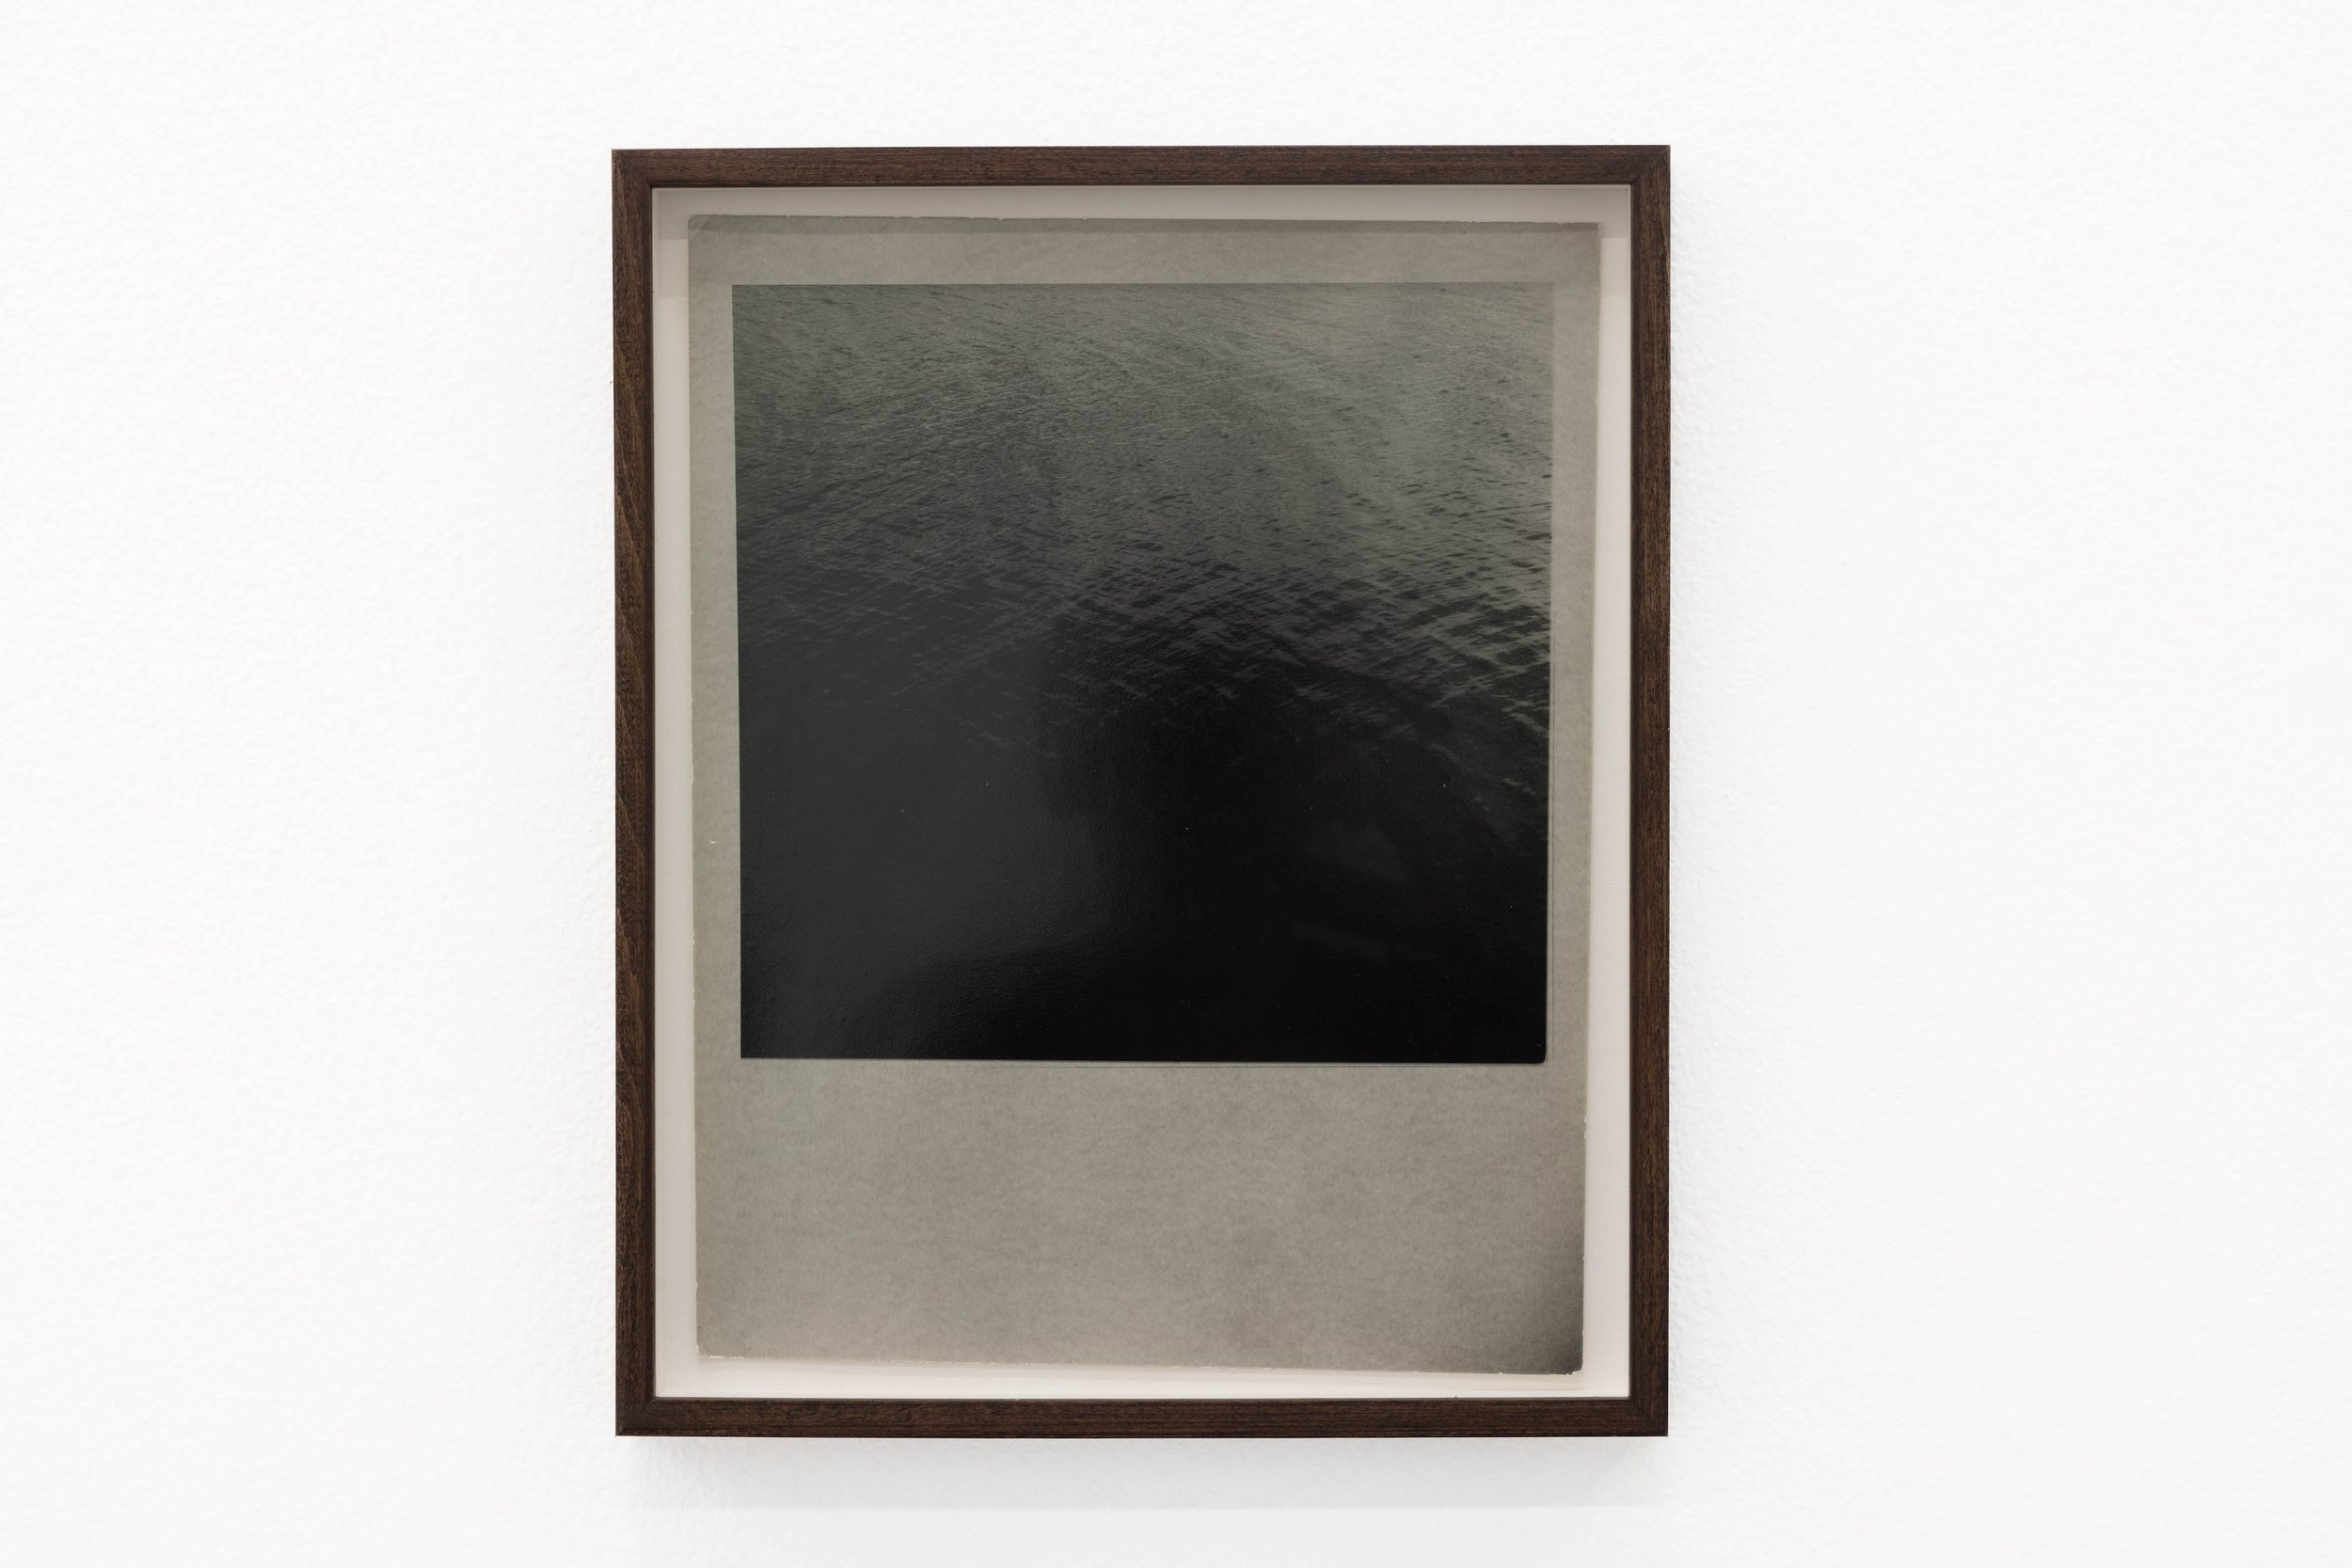  Untitled (dark sea), 2014, black and white analogue photograph on baryté paper, 29 x 23 cm / 32 x 26 cm (framed) 